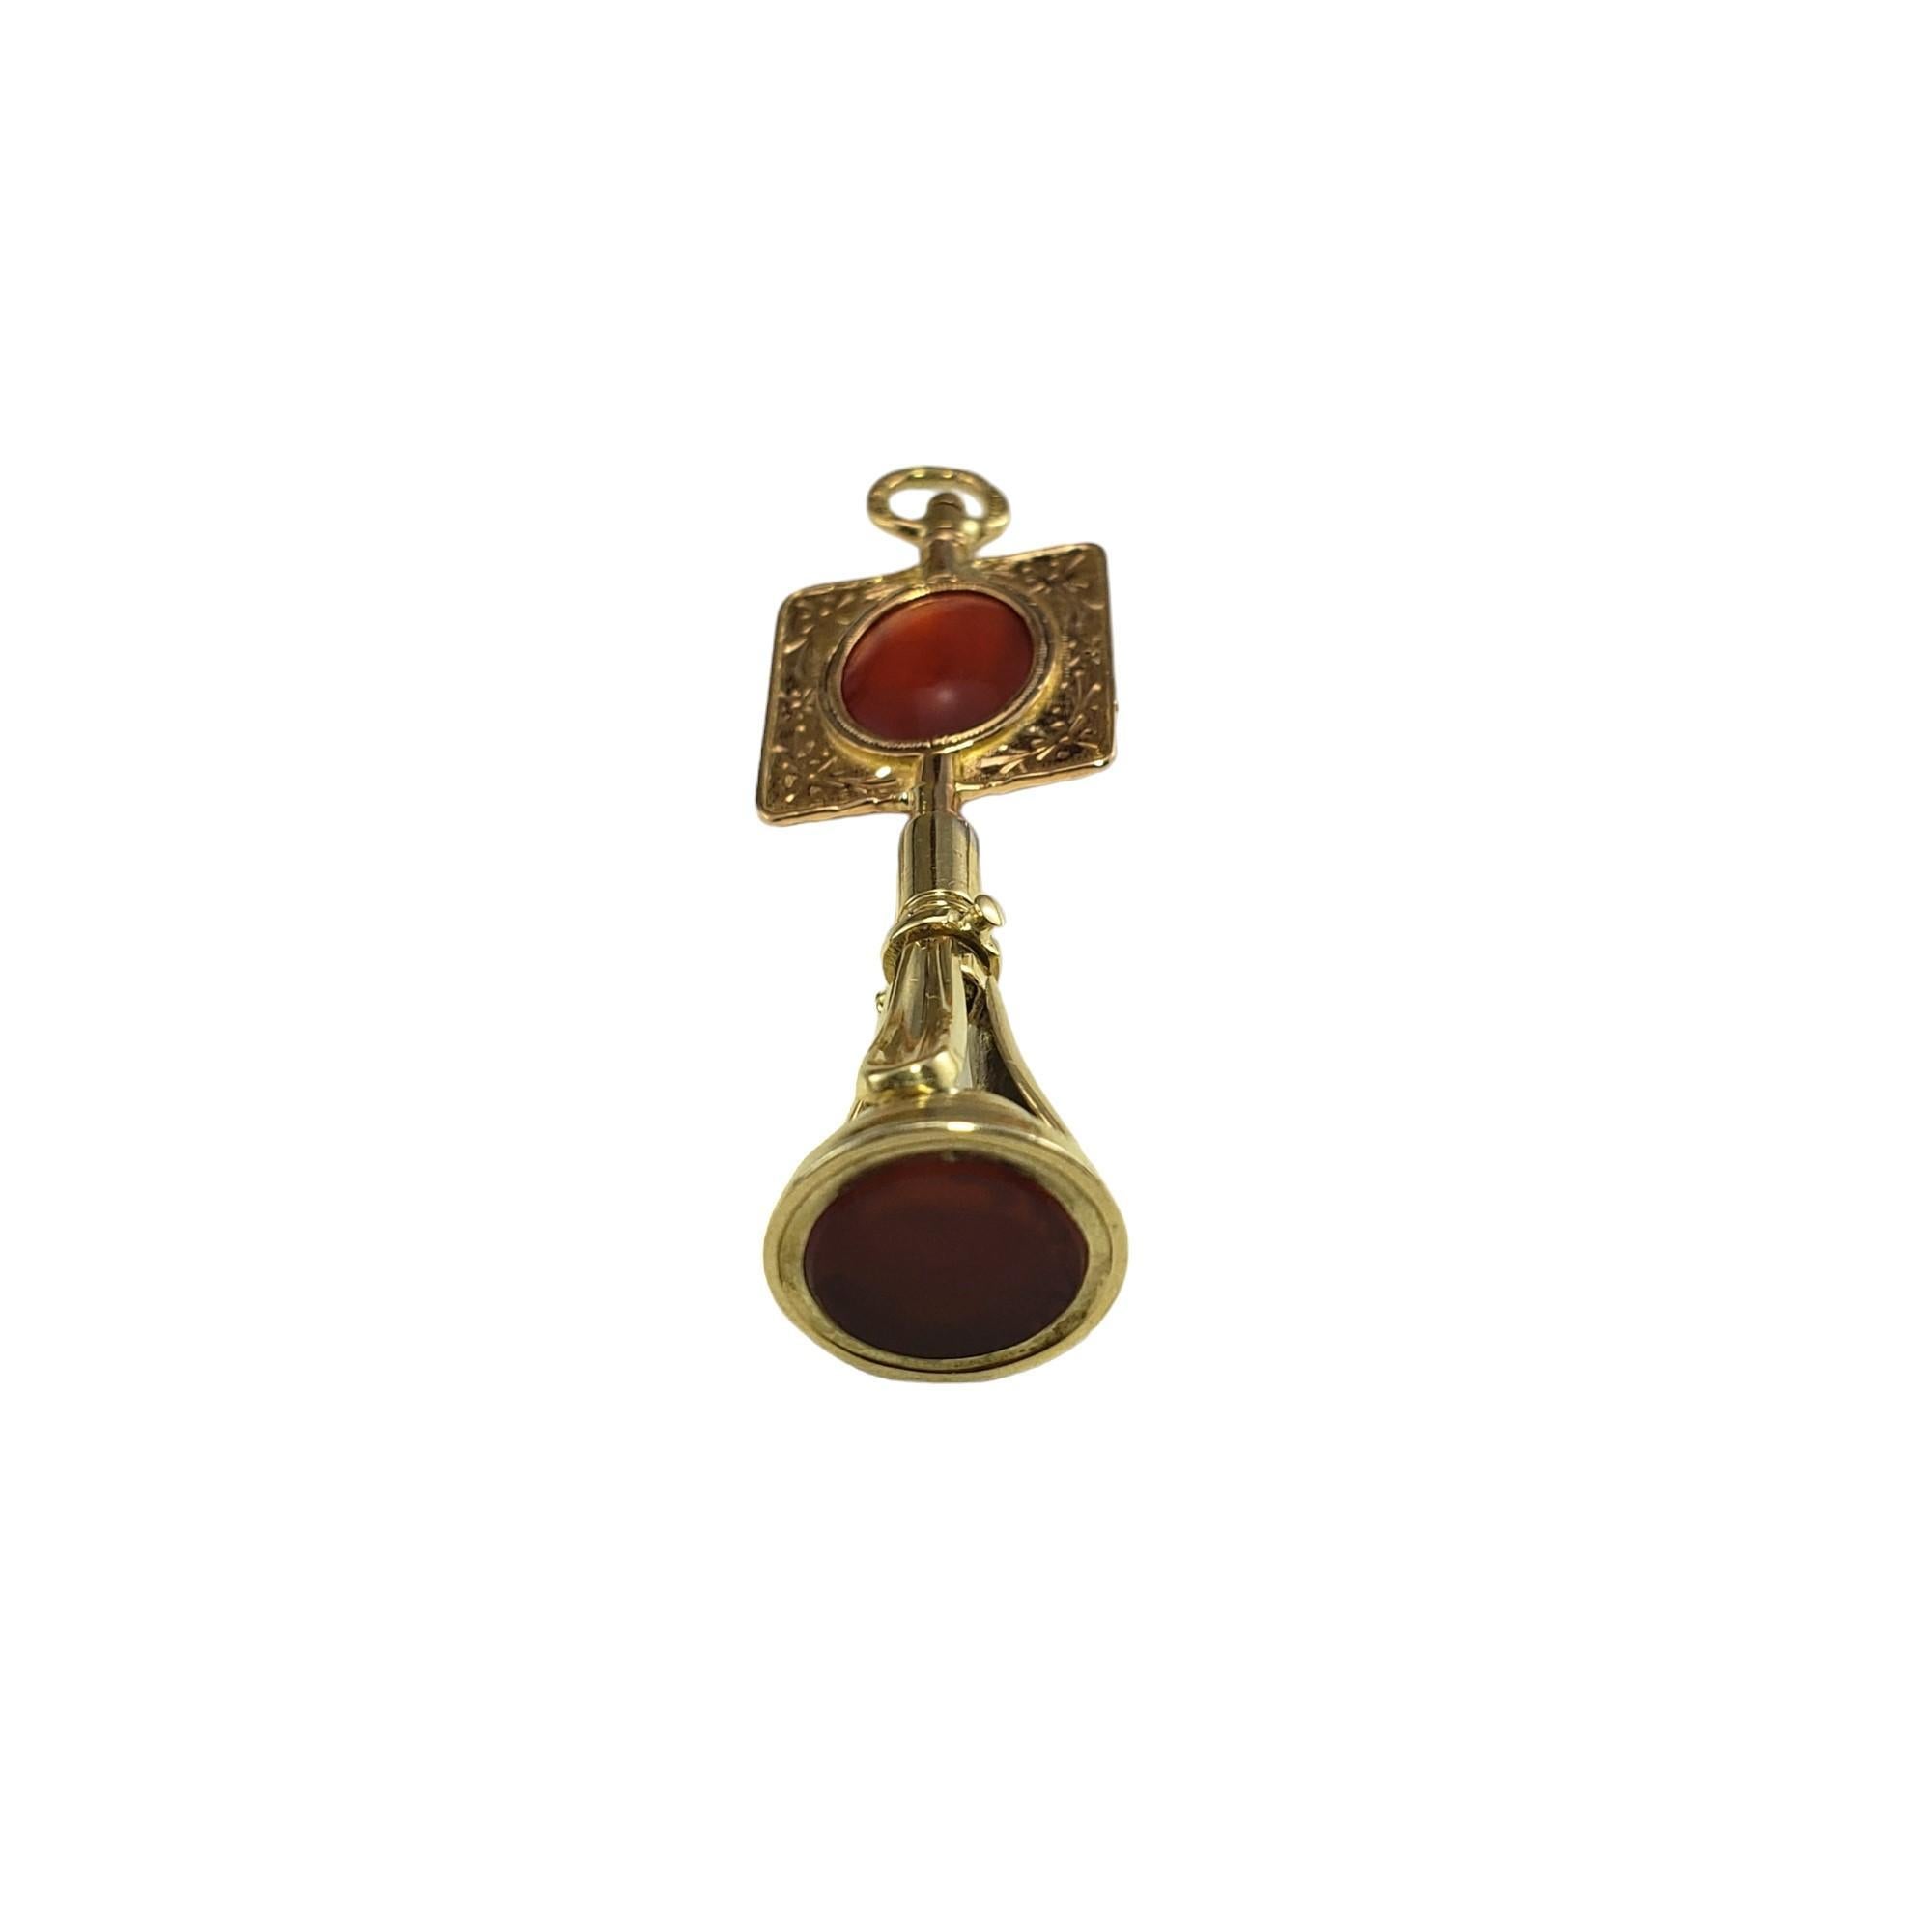 Vintage 14 Karat Yellow Gold and Carnelian Fob Pendant-

This elegant fob pendant is crafted in beautifully detailed 14K yellow gold and two carnelian stones.

Size: 43 mm x 13 mm

Stamped: 14K

Weight:  3.5 gr./  2.2 dwt.

Very good condition,